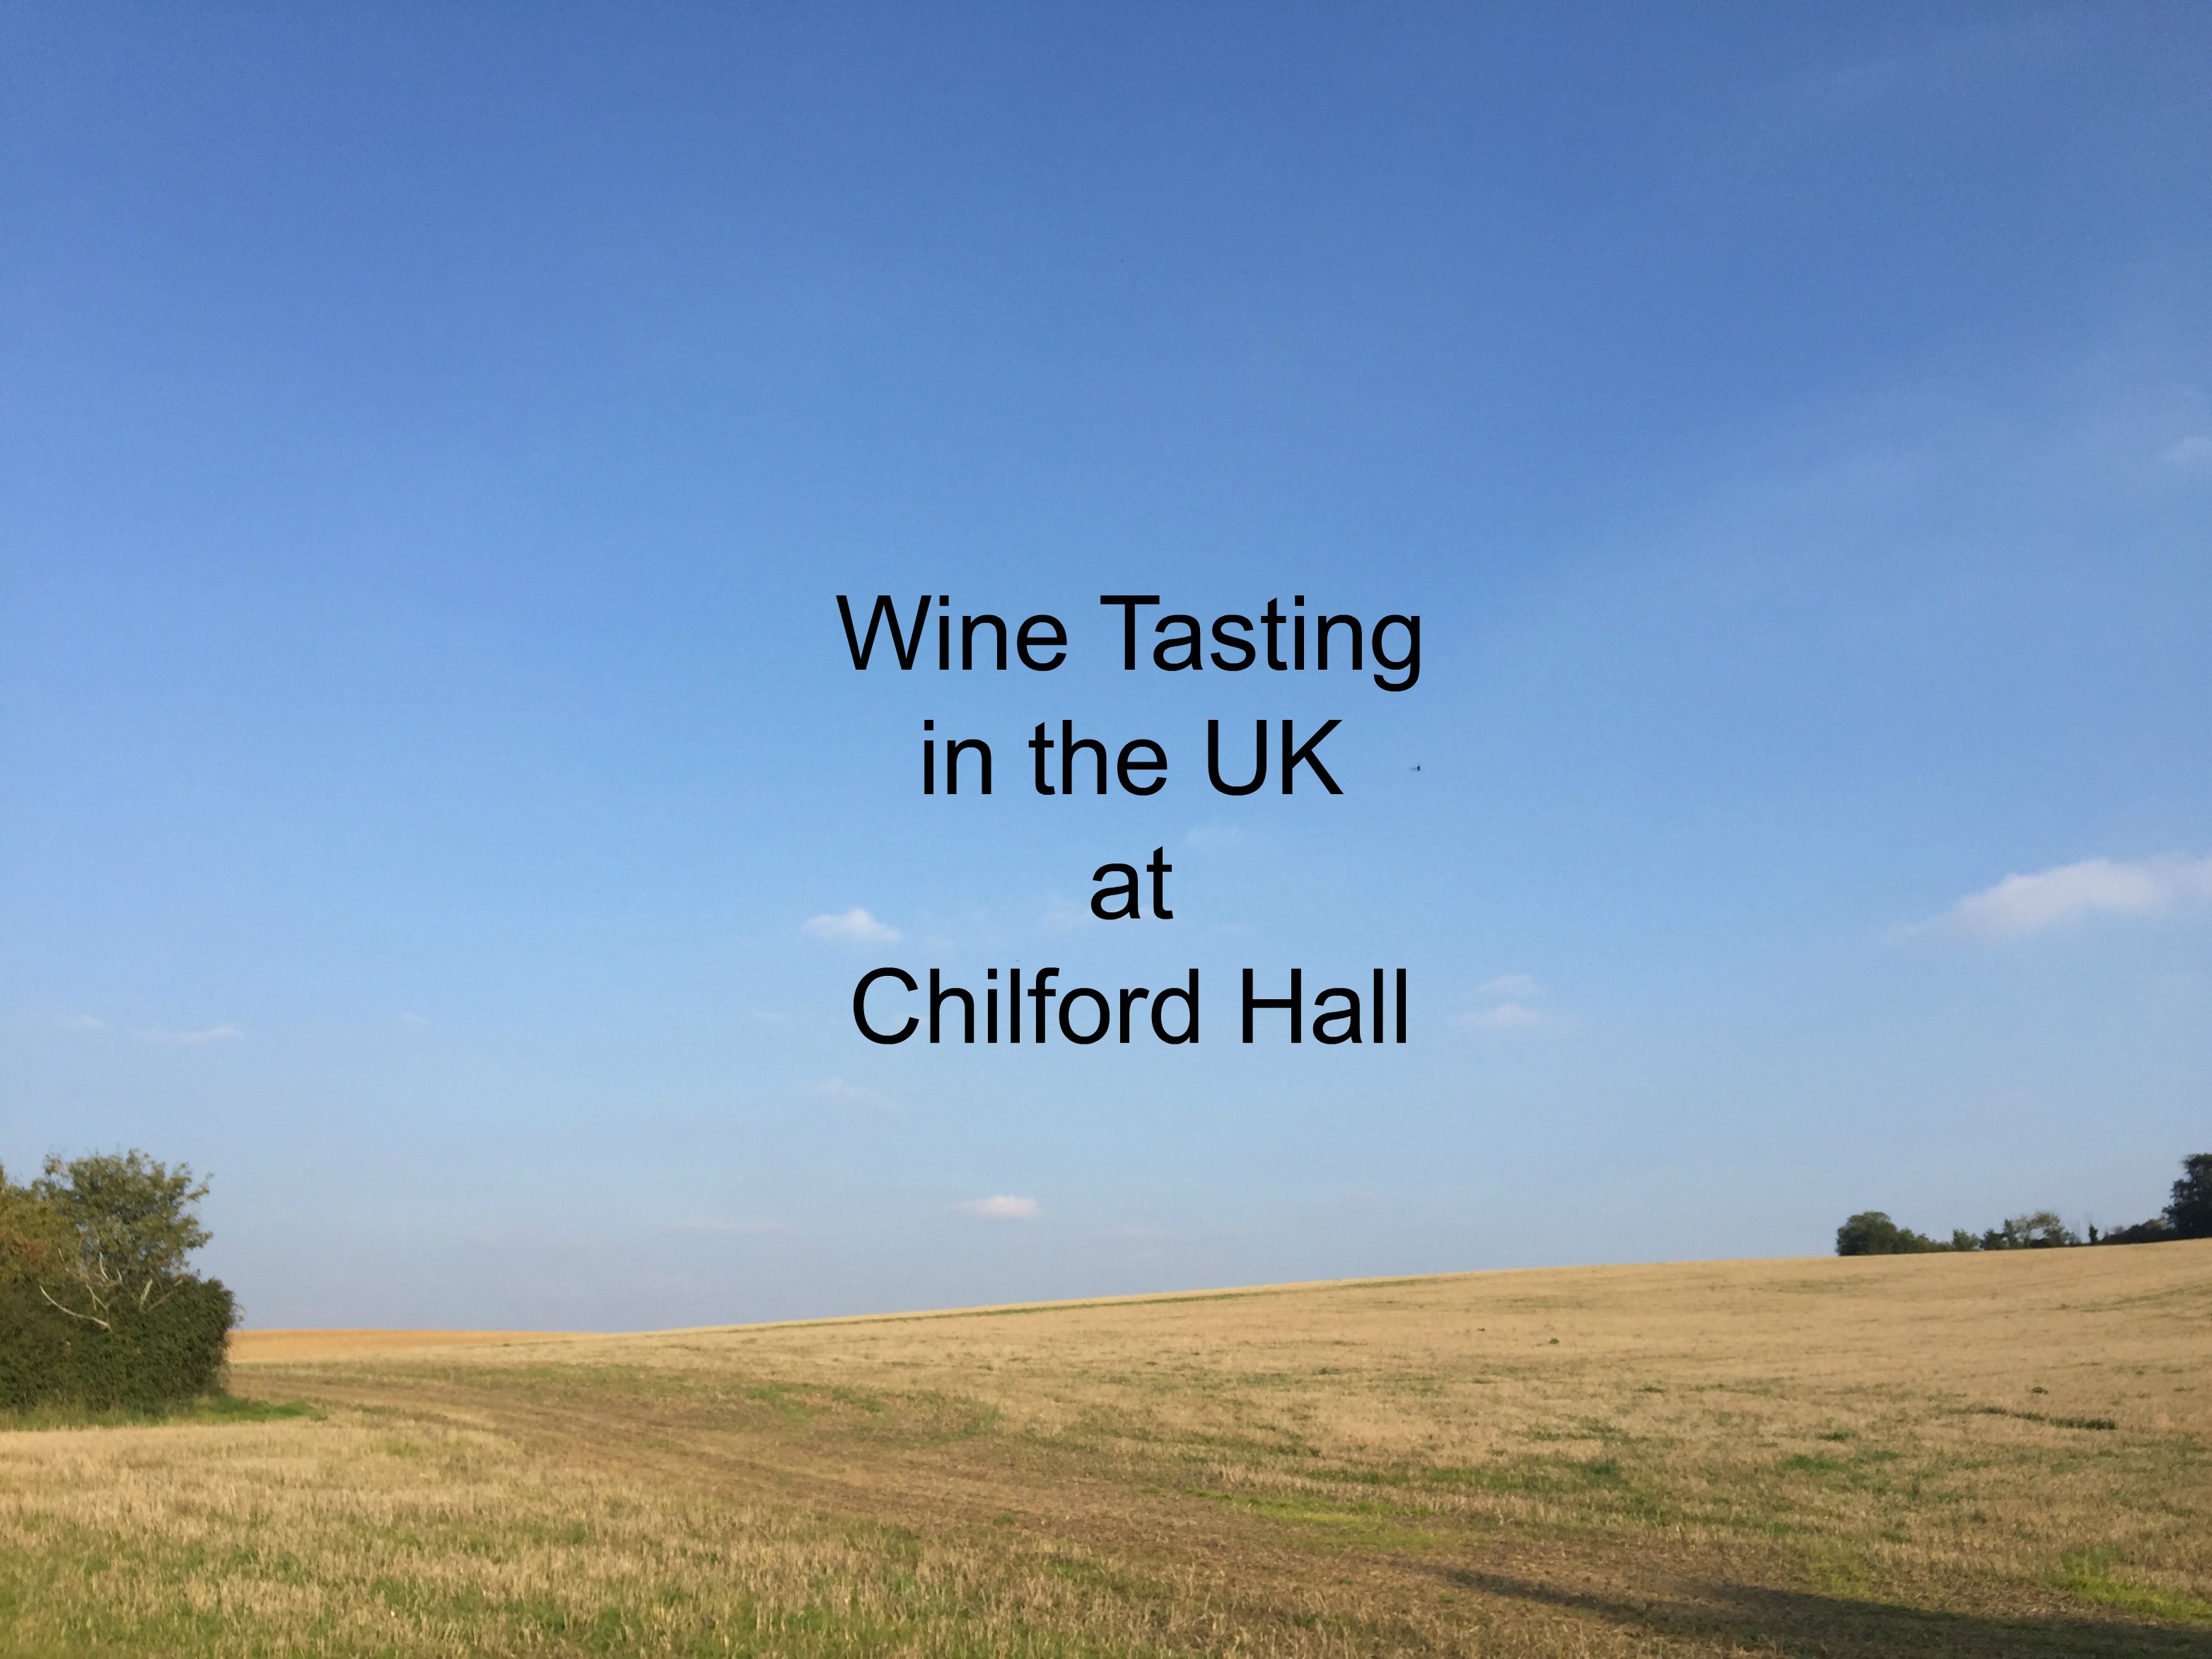 Wine tasting in the UK at Chilford Hall